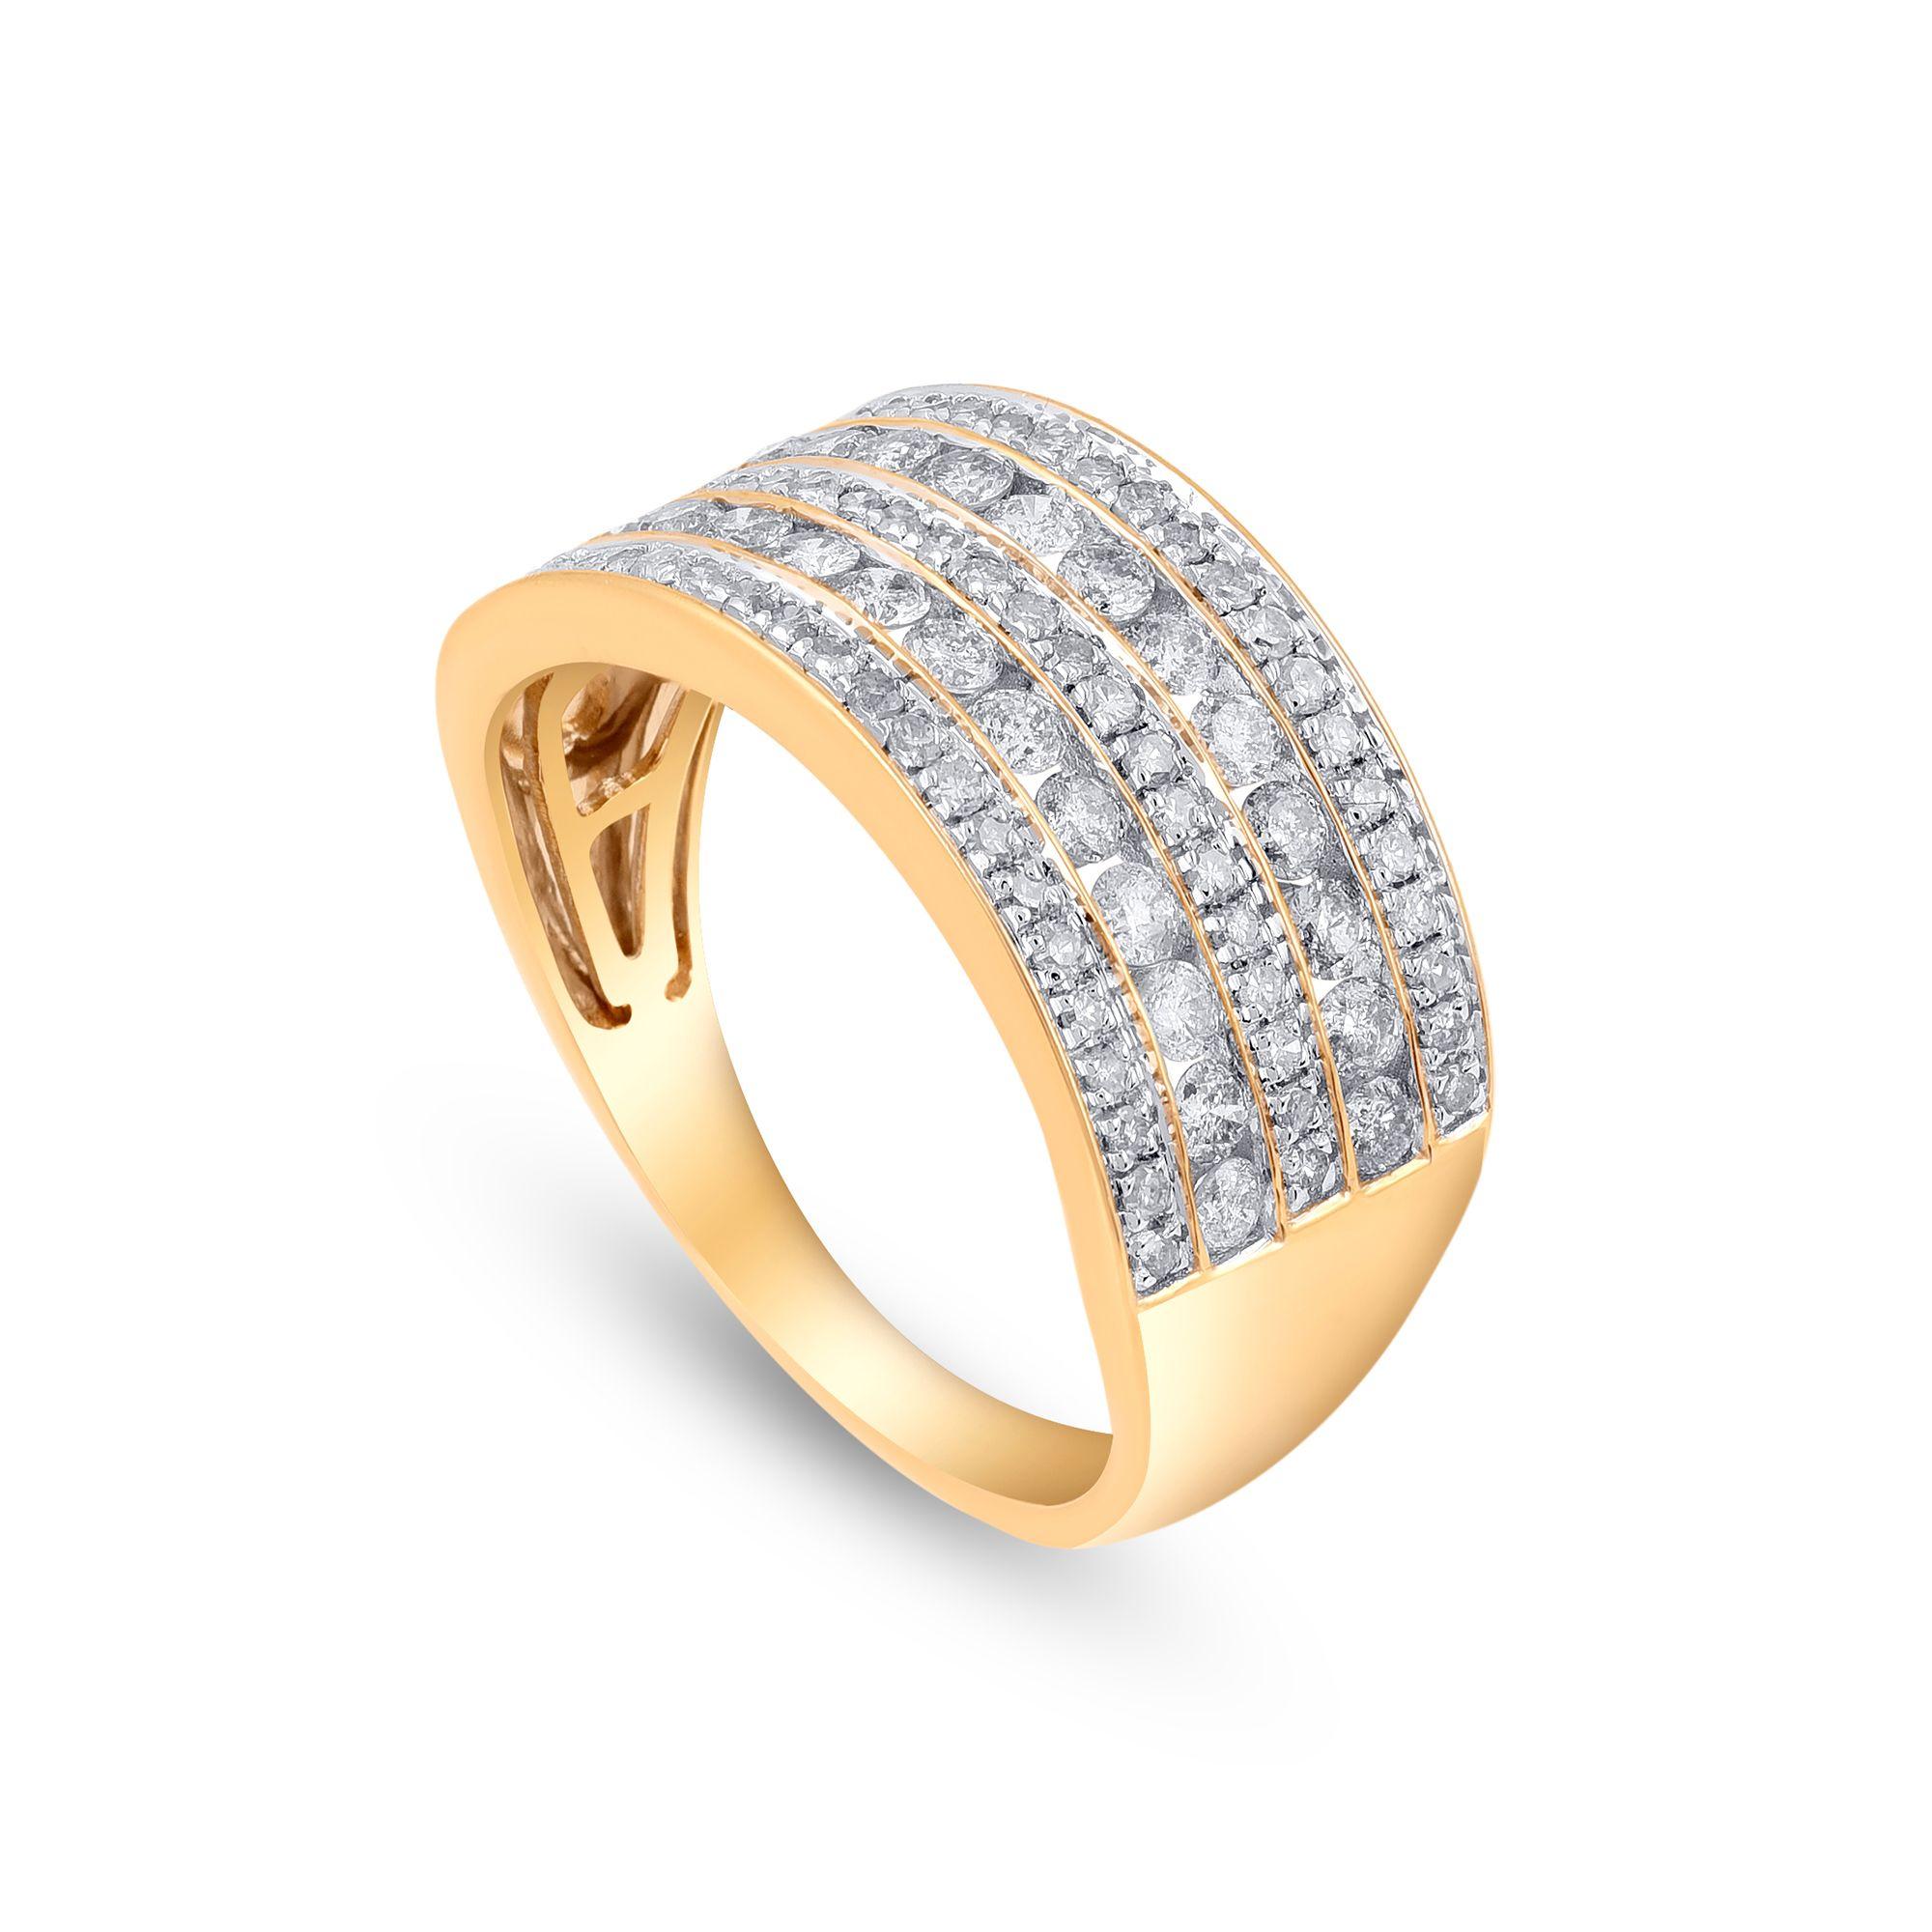 This stunning multi row bridal band is crafted in 10 karat gold. The ring glitters beautifully with 89 diamonds studded in micro-prong and channel setting. Diamonds are graded H-I Color, I2-I3 Clarity. The ring is available in several sizes 
